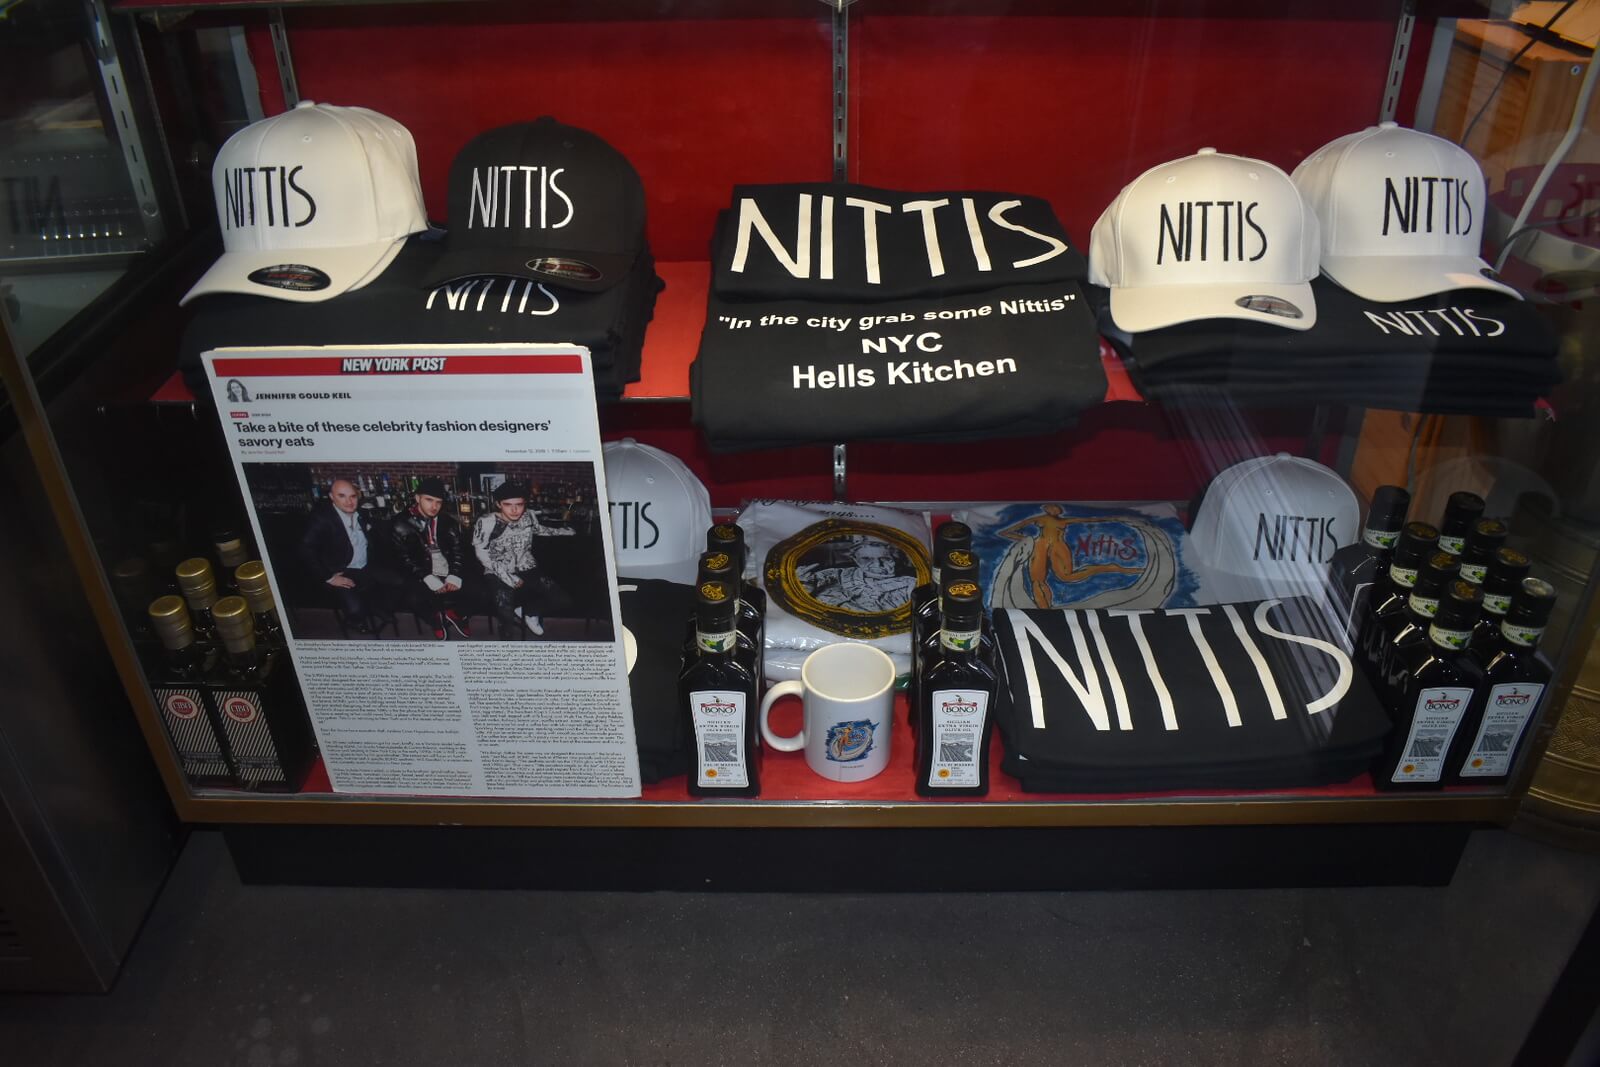 Nittis merch in a red display case showing black and white hats and tshirts